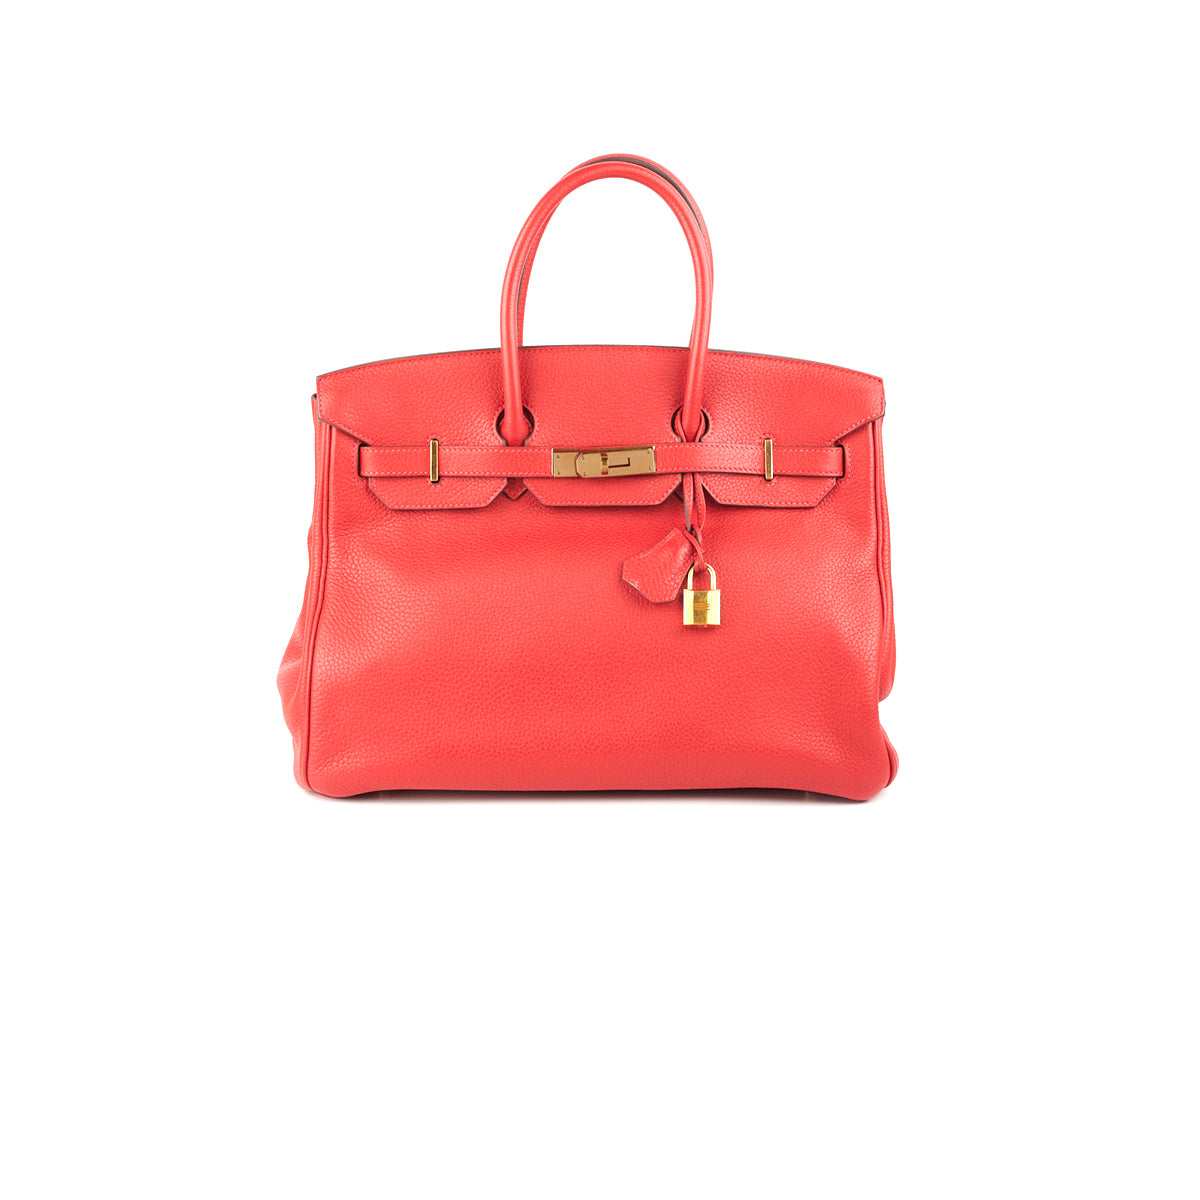 Hermès - Authenticated Birkin 35 Handbag - Leather Red Plain for Women, Very Good Condition